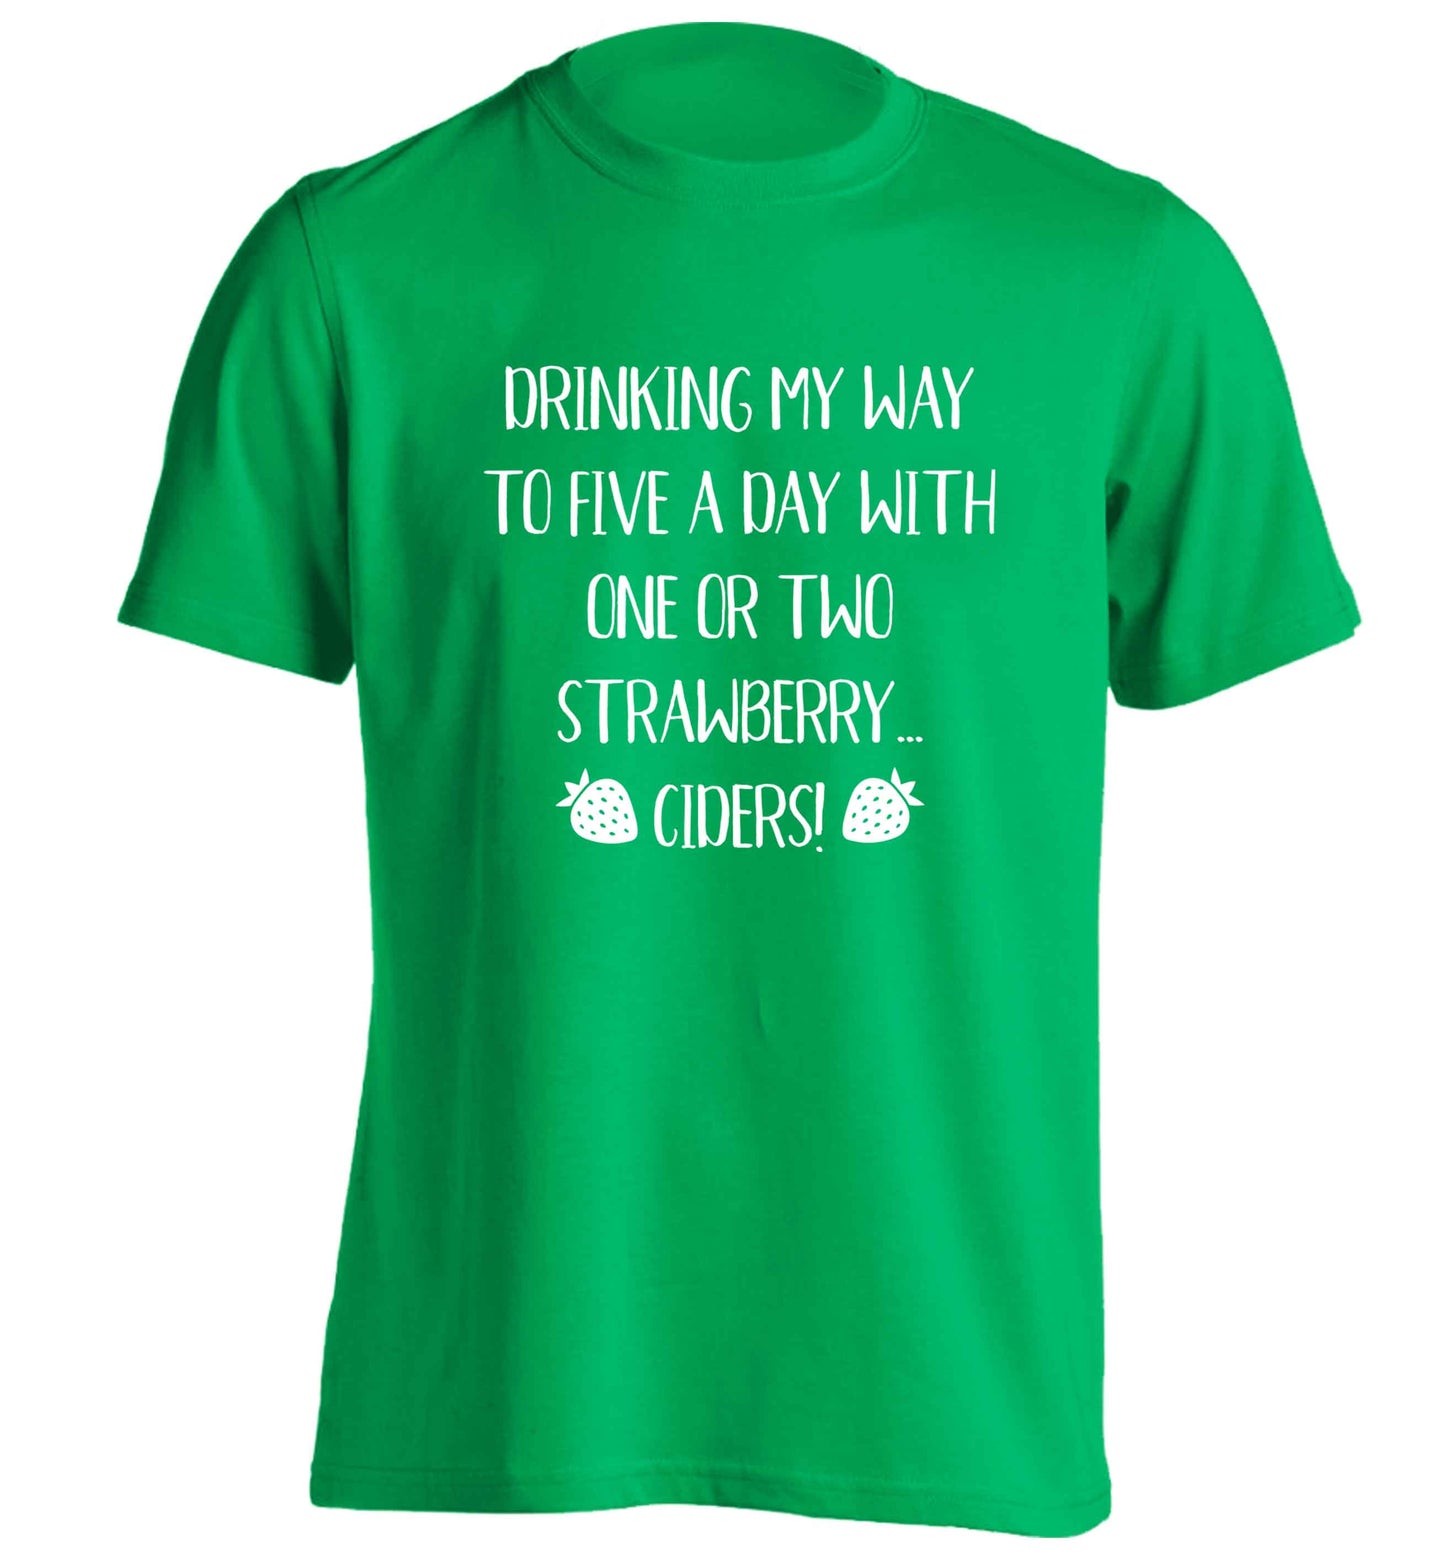 Drinking my way to five a day with one or two strawberry ciders adults unisex green Tshirt 2XL